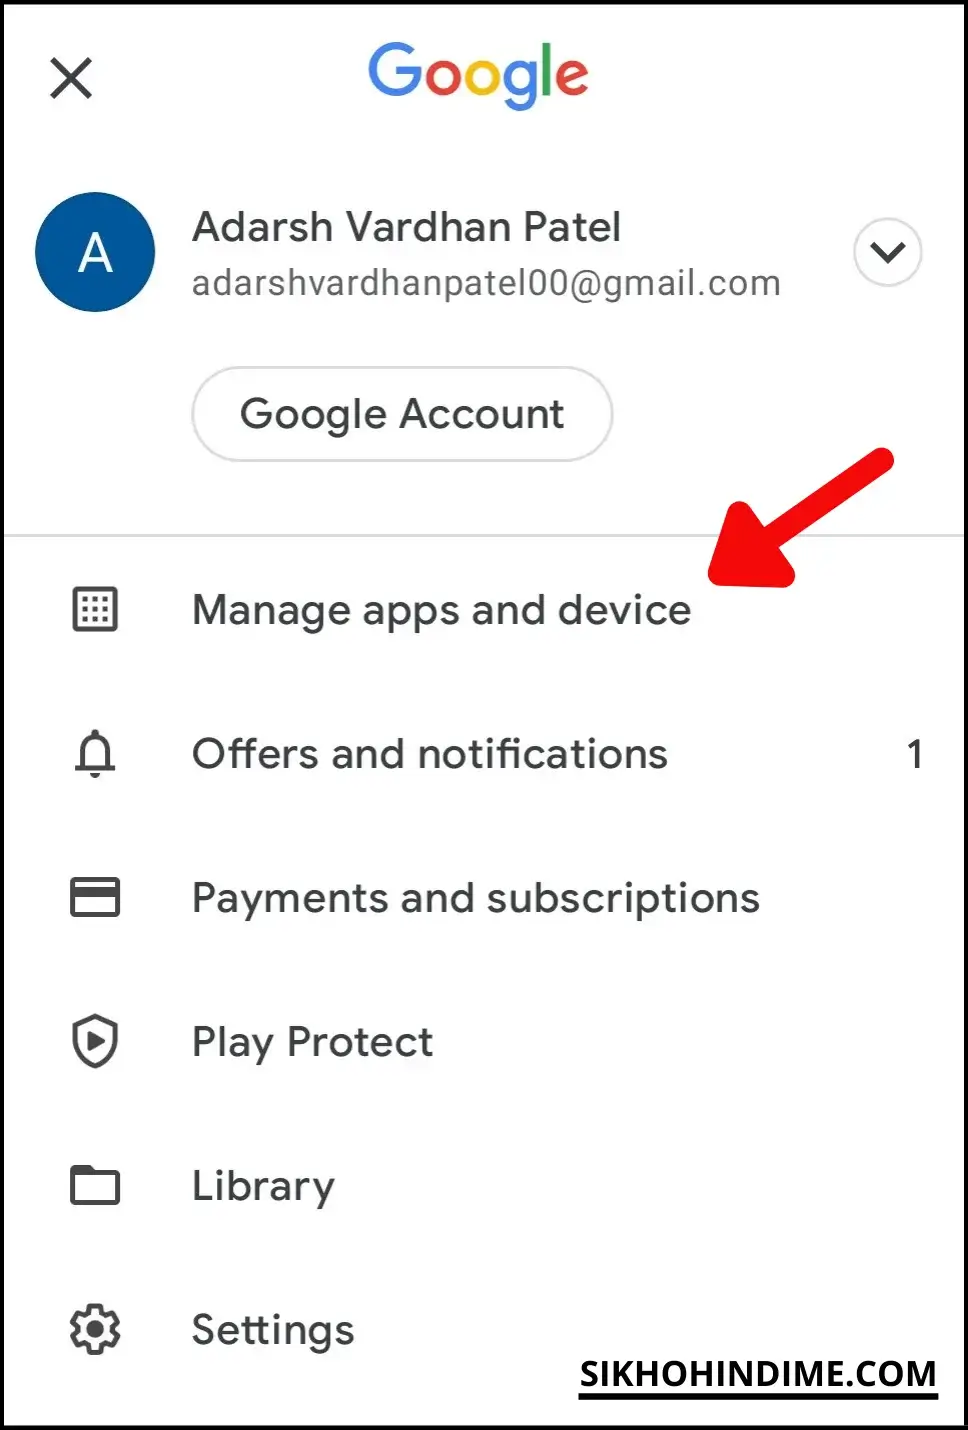 Click on manage apps and devices